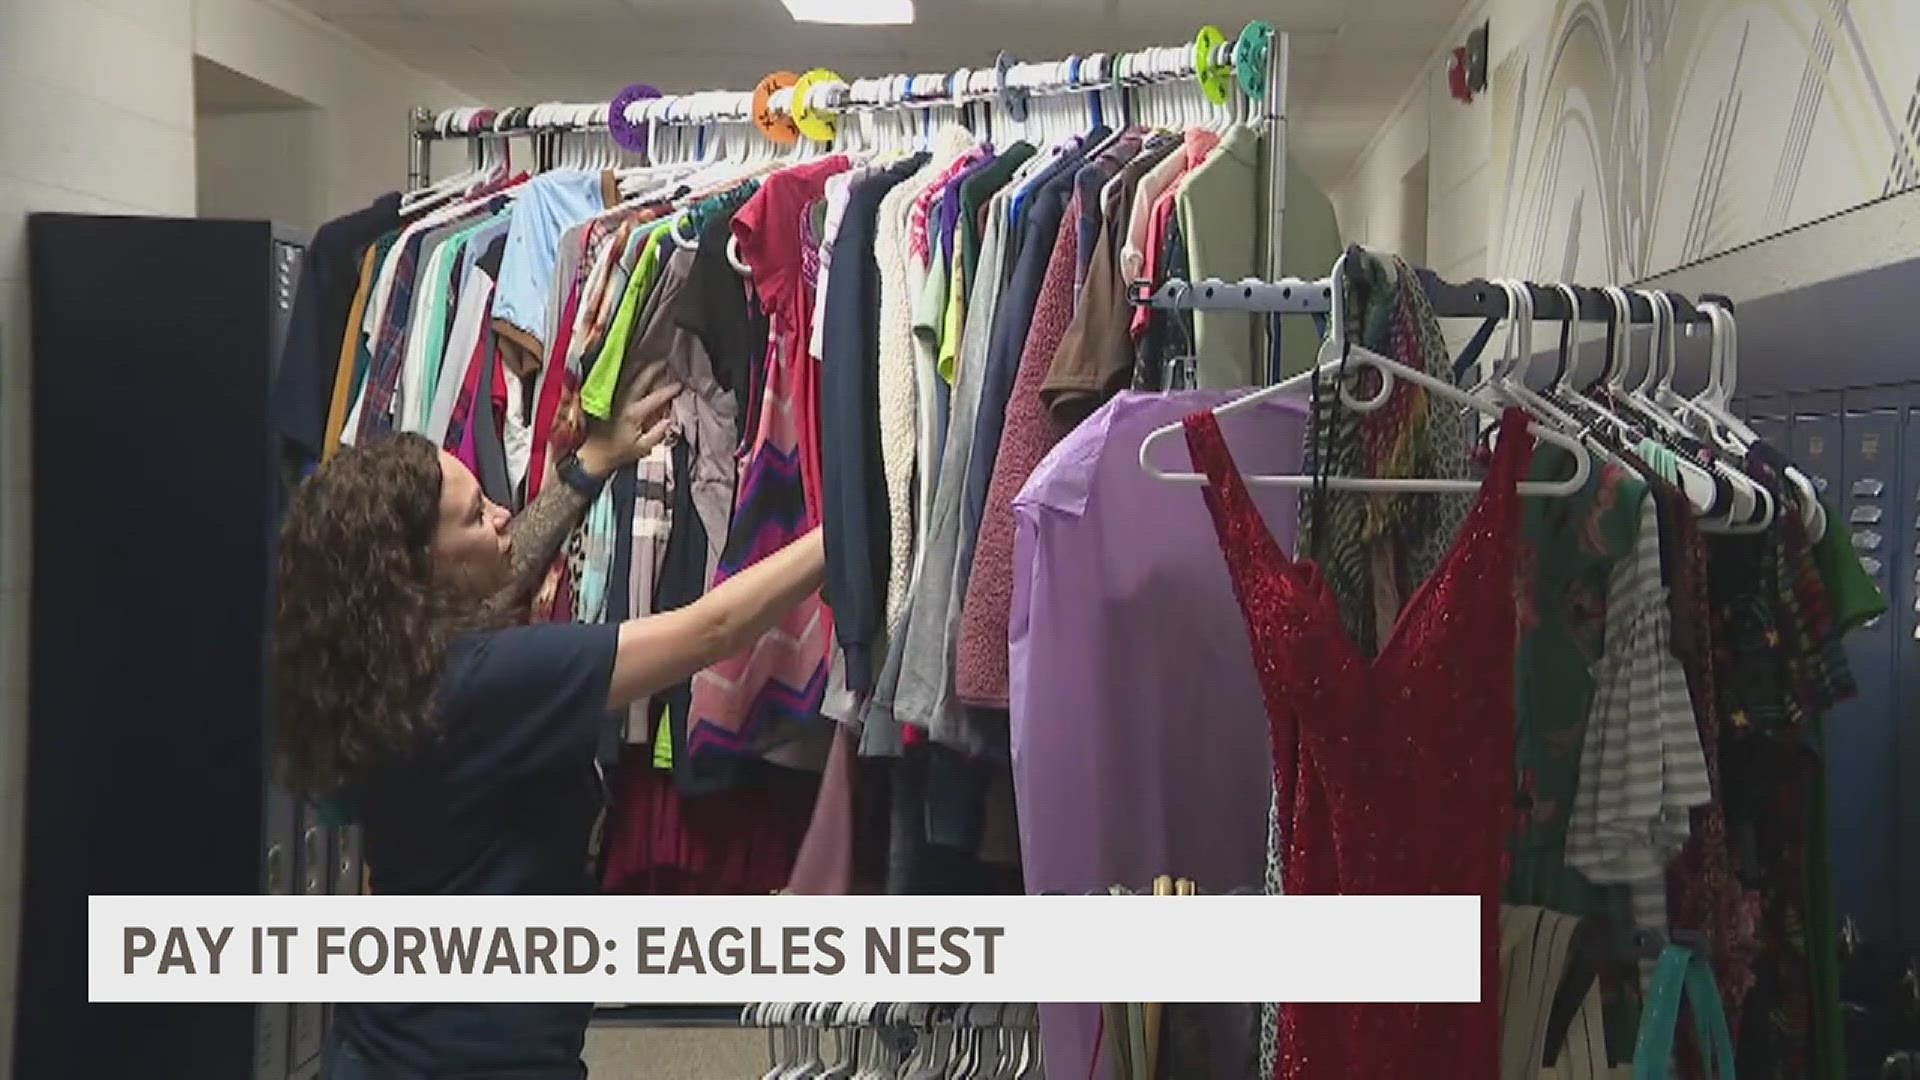 Angie Owen is a special educator at the Mercer County High School, and also started the 'Eagles Nest'. This donation closet has materials for kids to use.